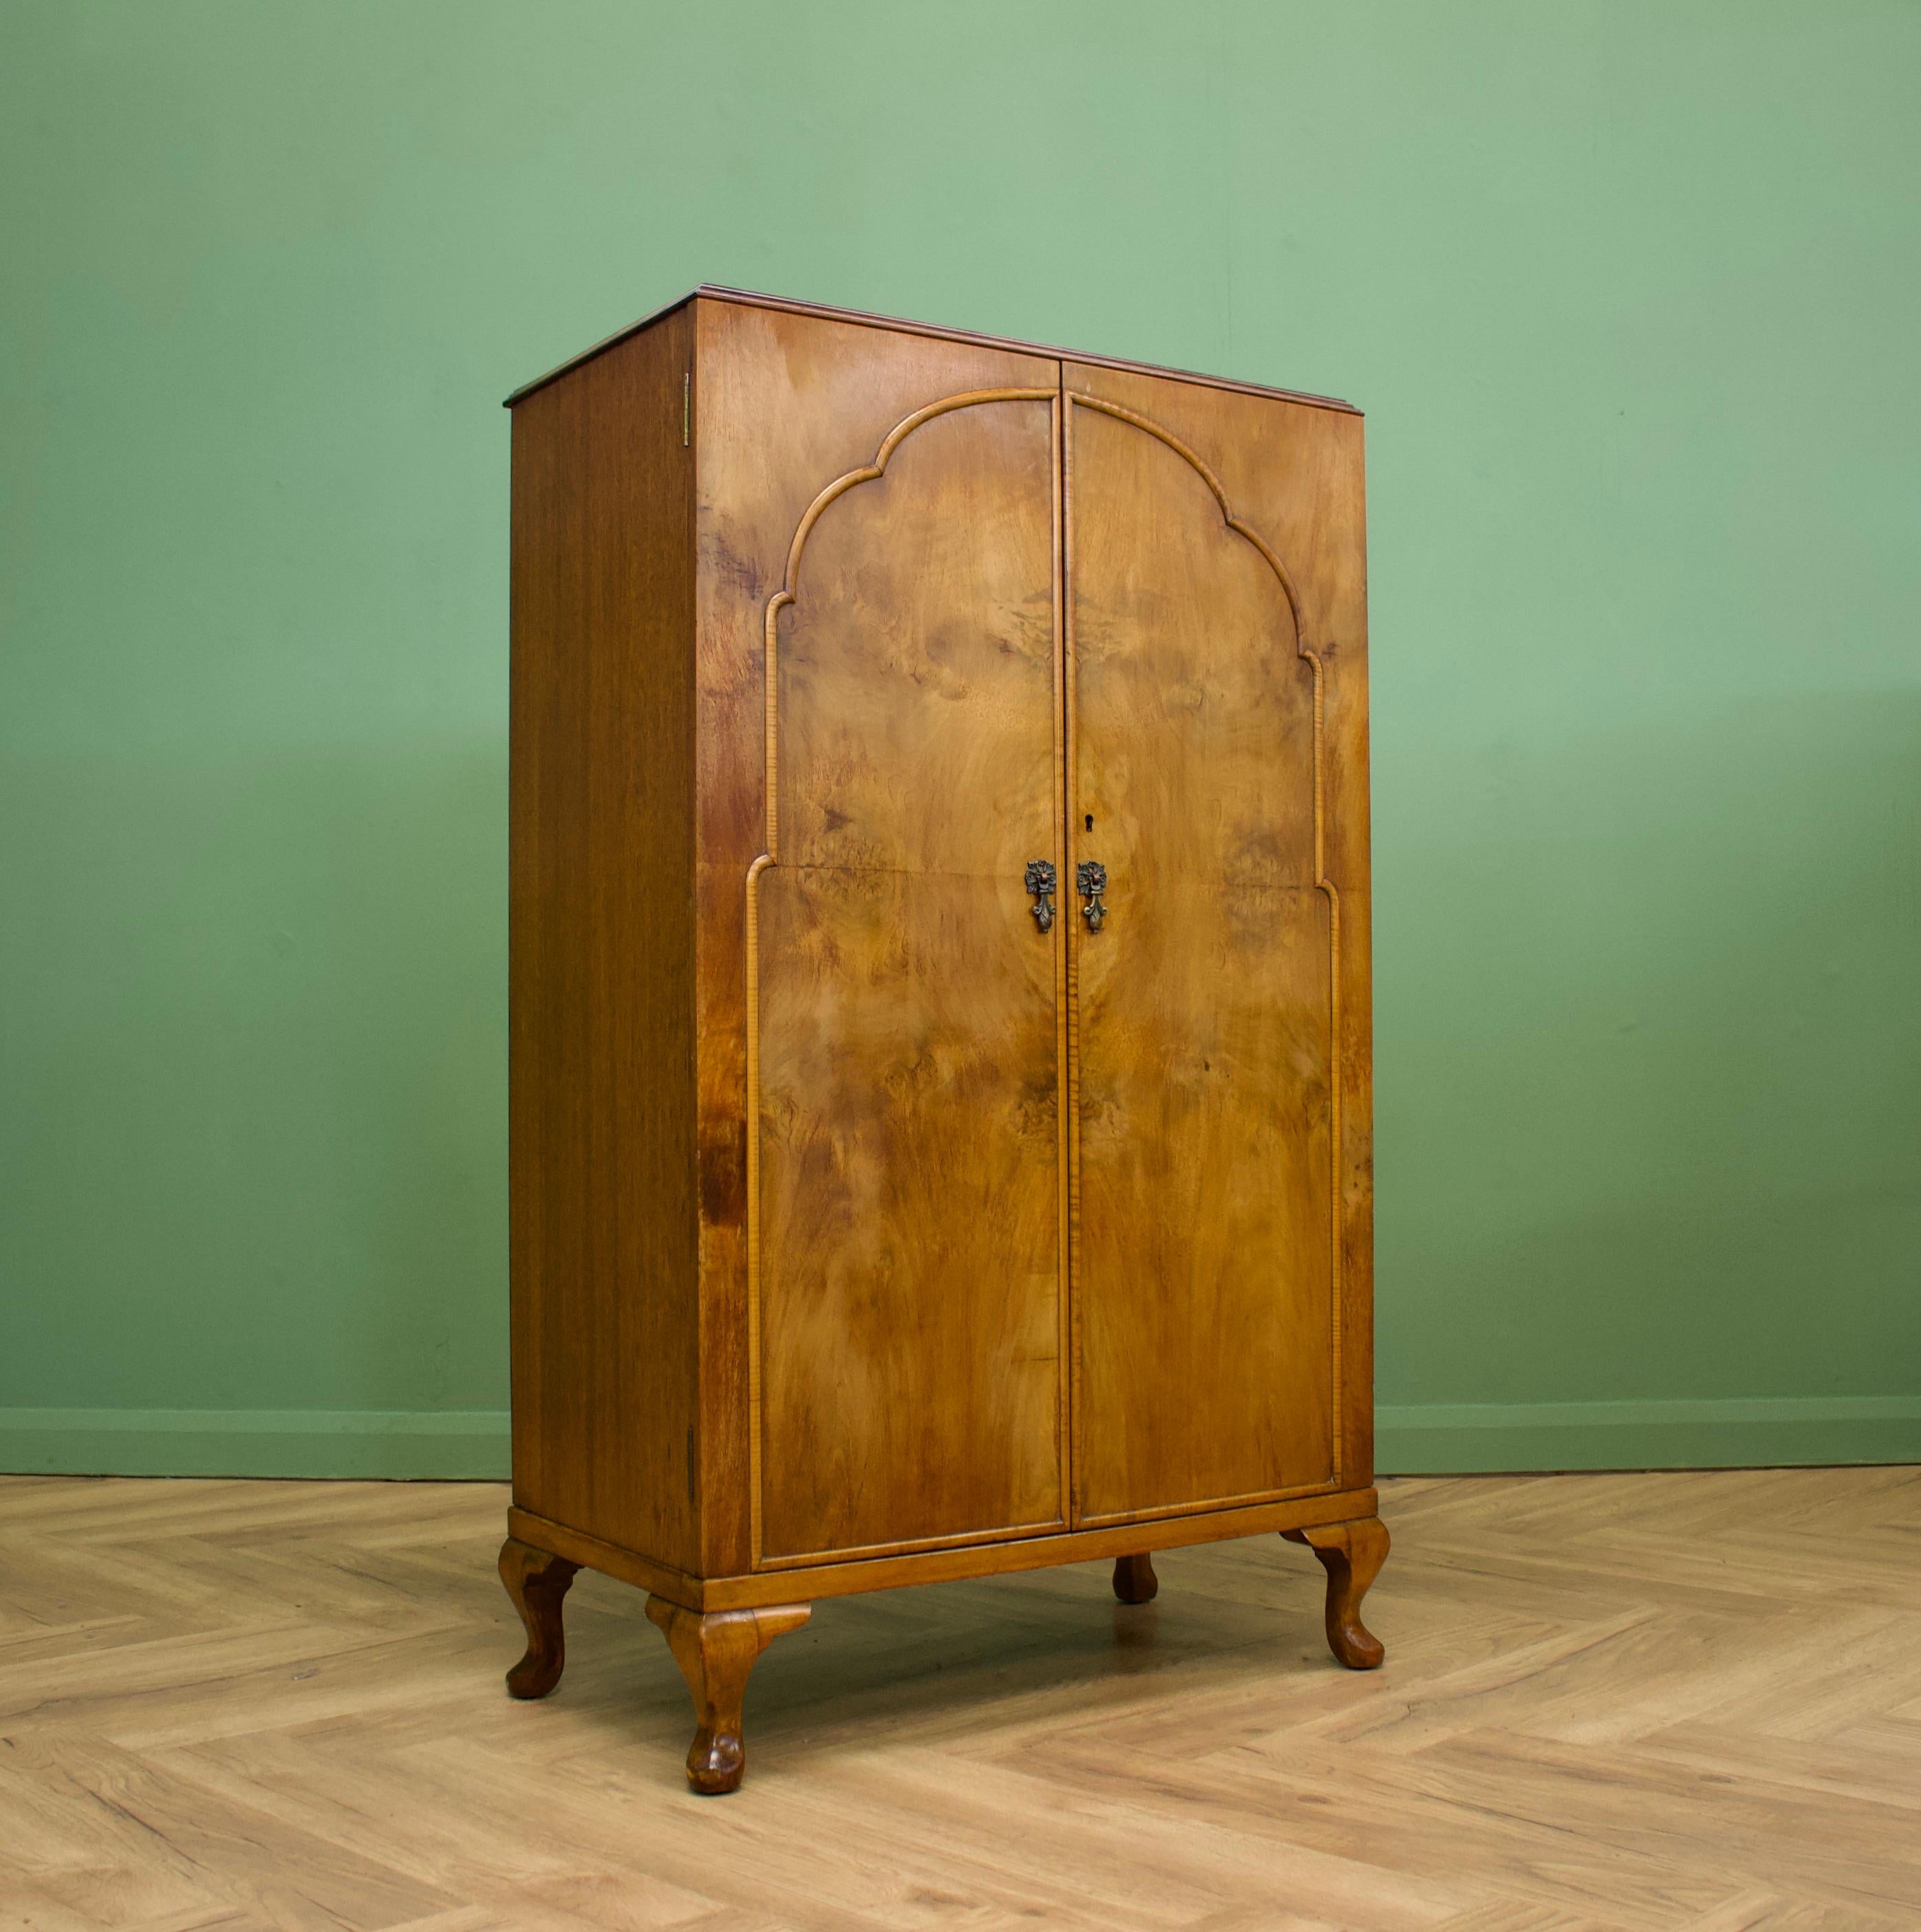 British Art Deco Walnut and Walnut Veneer Tallboy or Cabinet from Waring and Gillow, 193